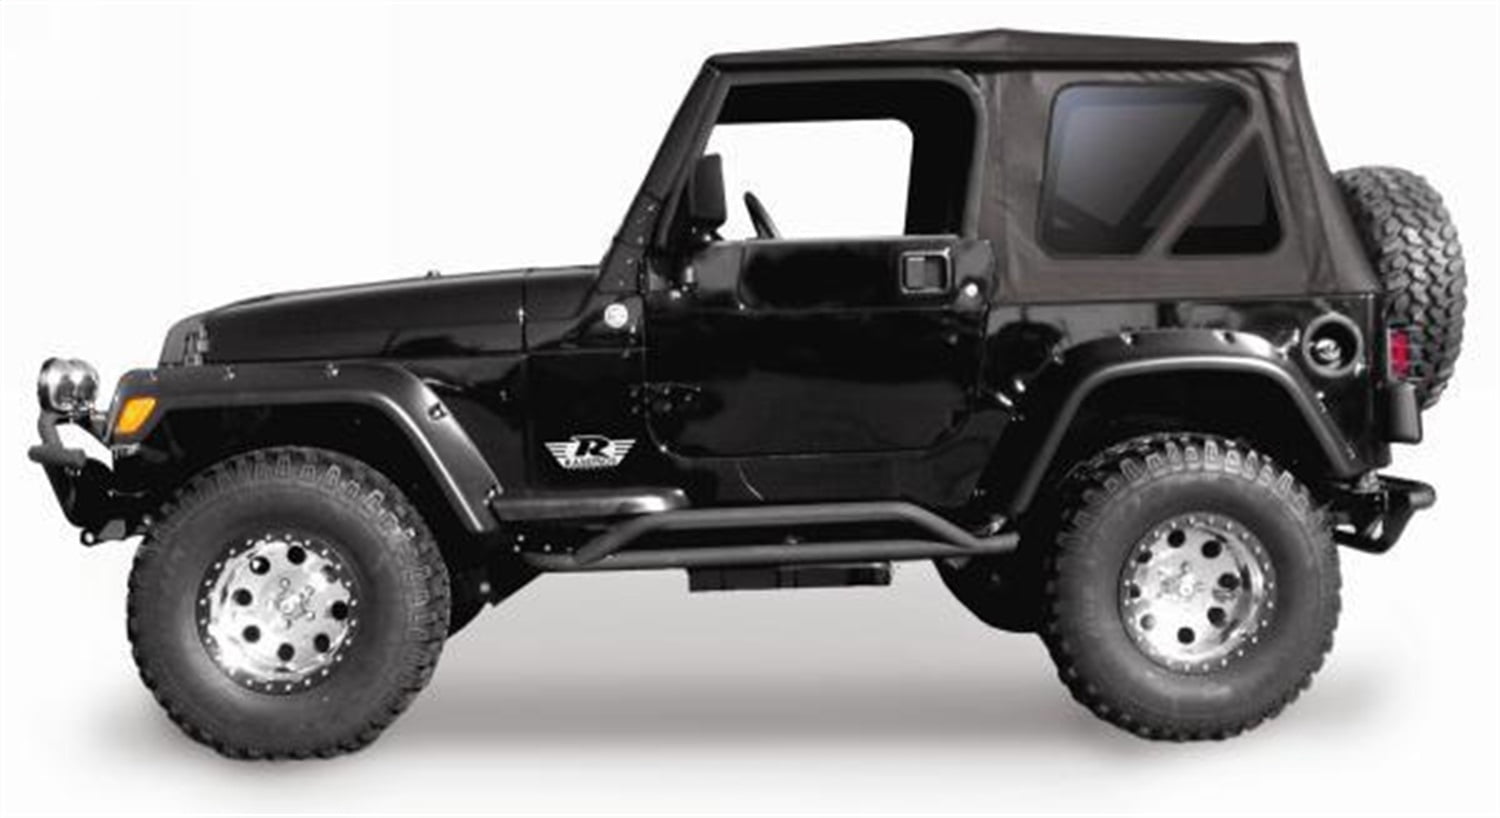 Sierra Offroad Soft Top for 1997 to 2006 Jeep Wrangler TJ - Black, Denim  Vinyl - 2 Door Jeep Soft Top with Rear Plastic Tinted Windows - Factory